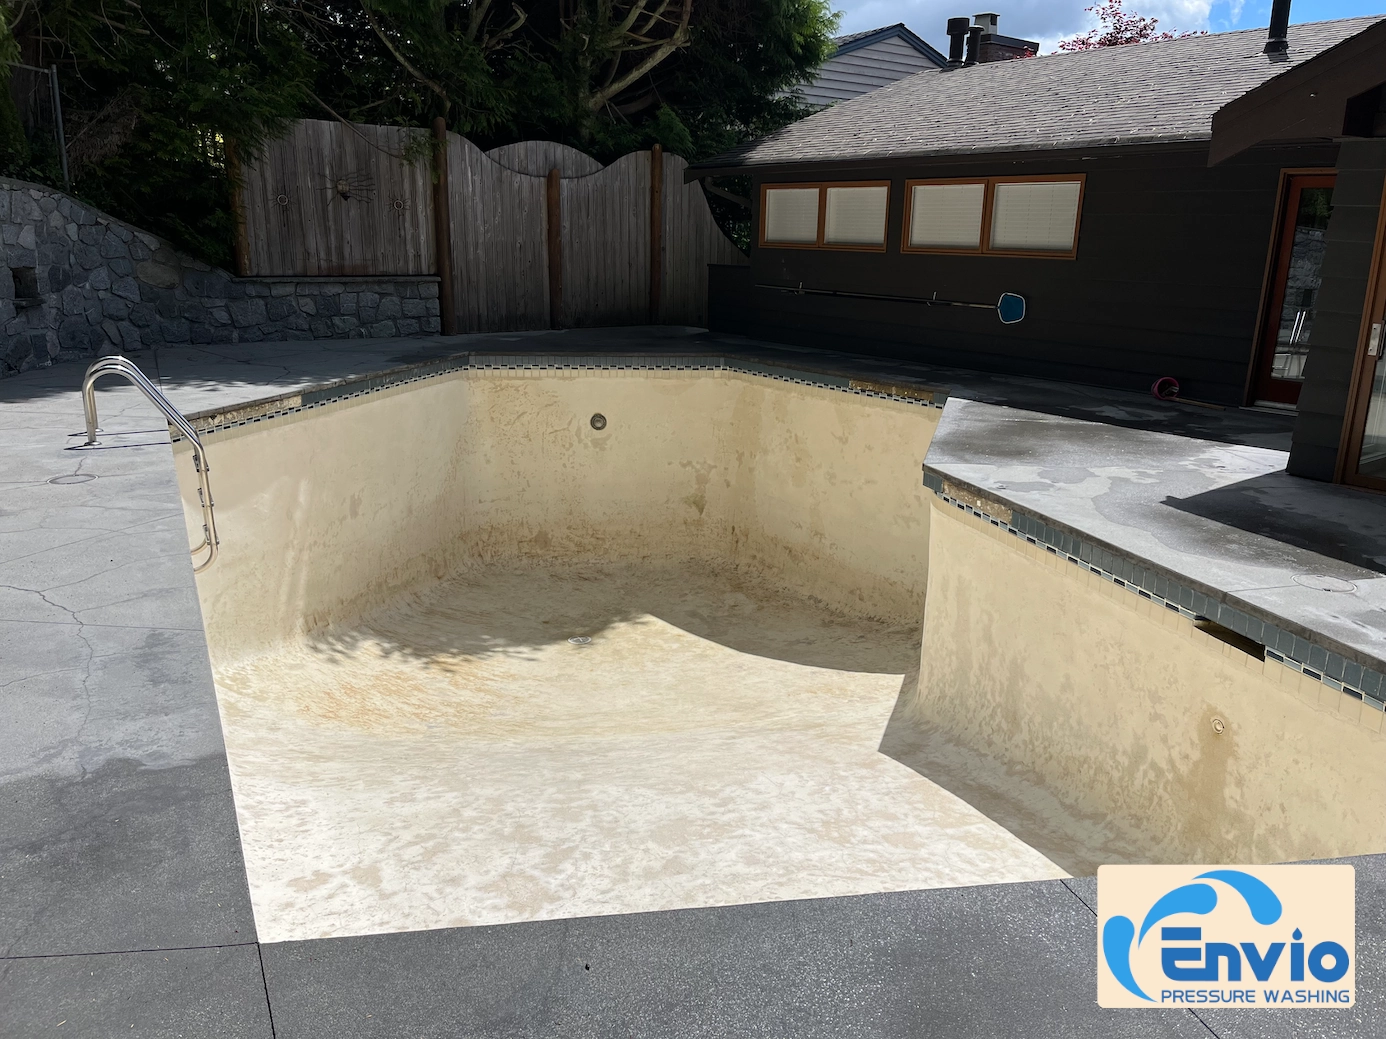 Draining and cleaning pool after